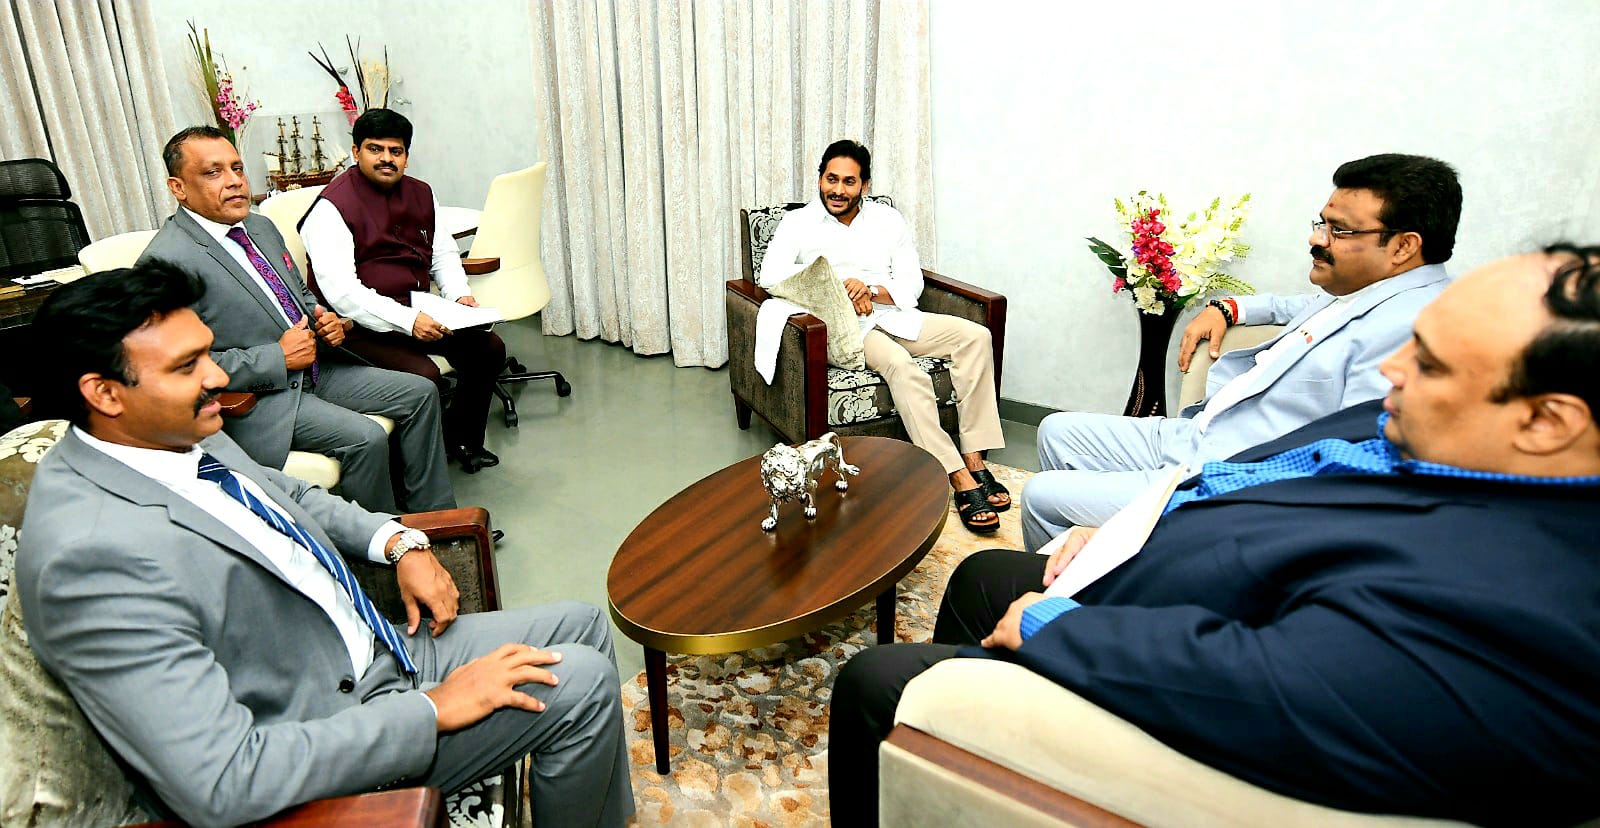 The Deputy High Commissioner of Sri Lanka and the Governor of Eastern Province meet Chief Minister of Andhra Pradesh